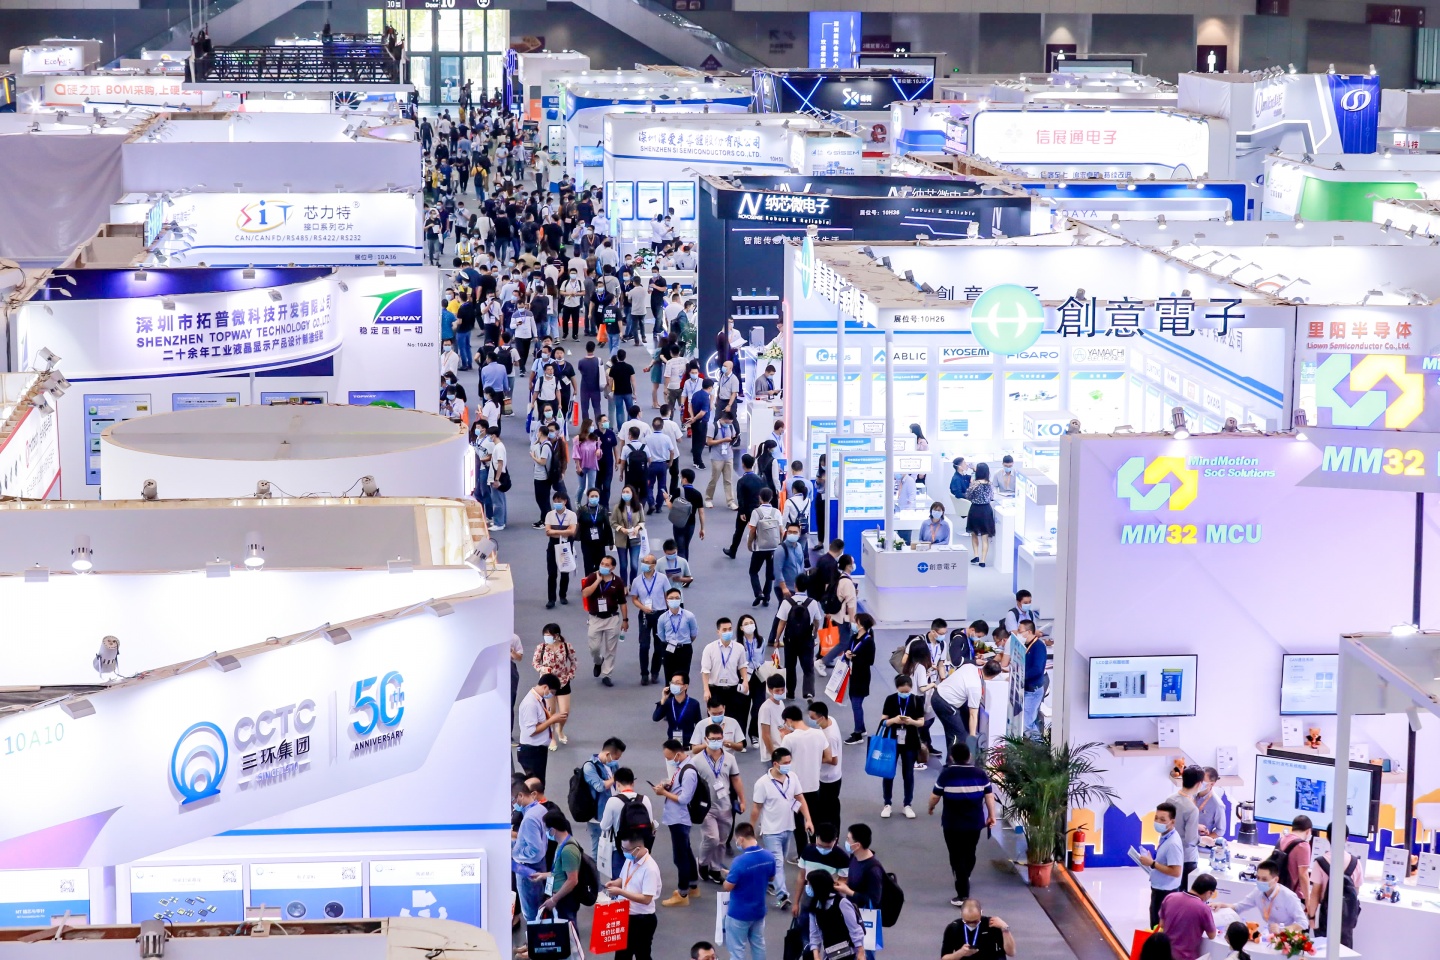 Atom Technology cordially invites you to attend the 2022 Munich South China Electronics Show!